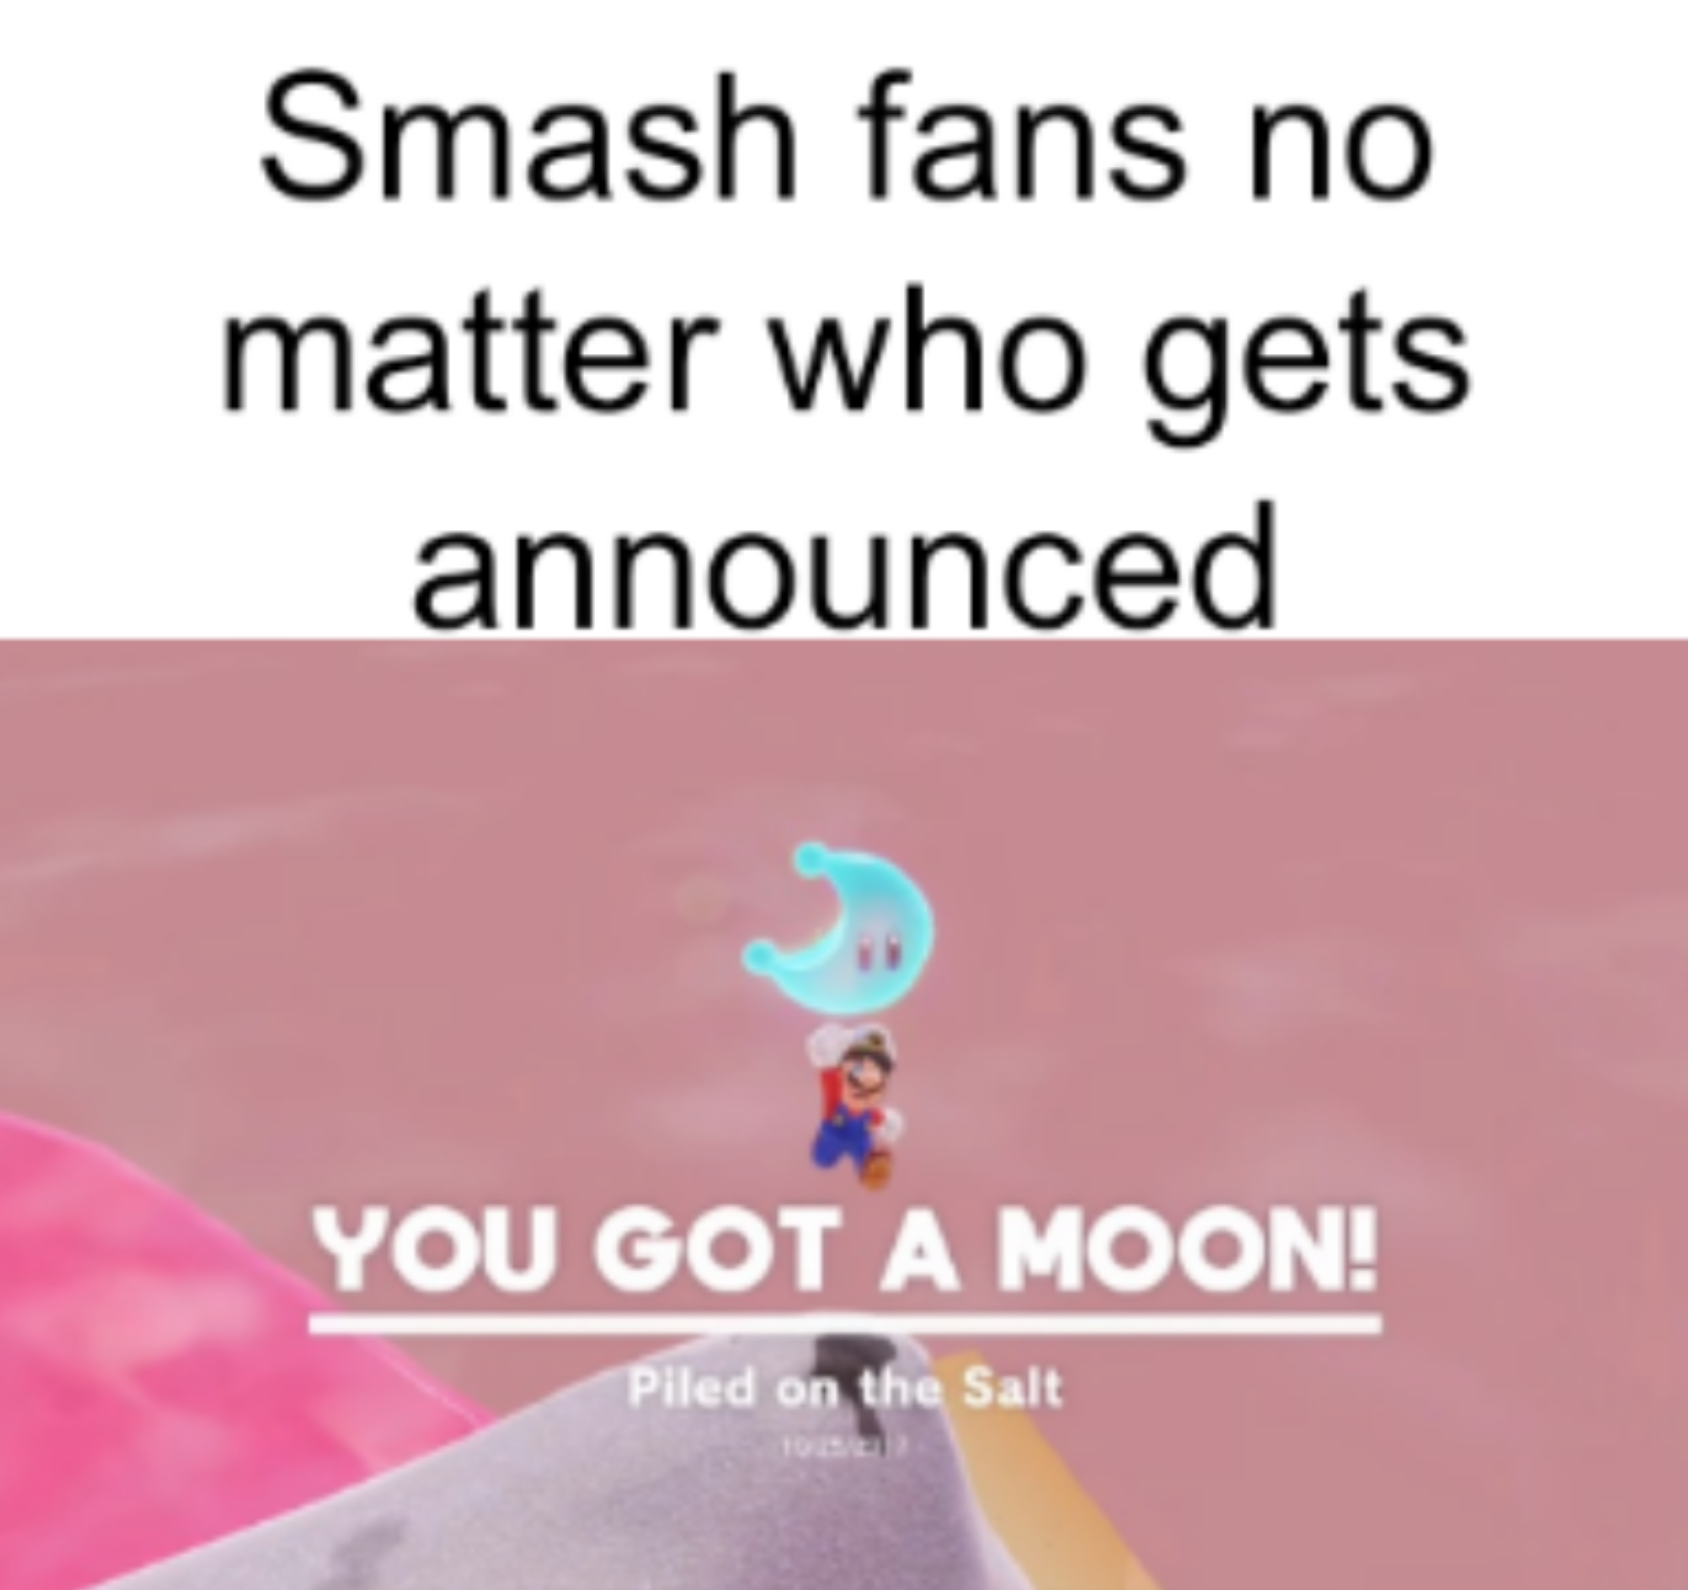 gaming memes - all rights reserved symbol - Smash fans no matter who gets announced You Got A Moon! Piled on the Salt